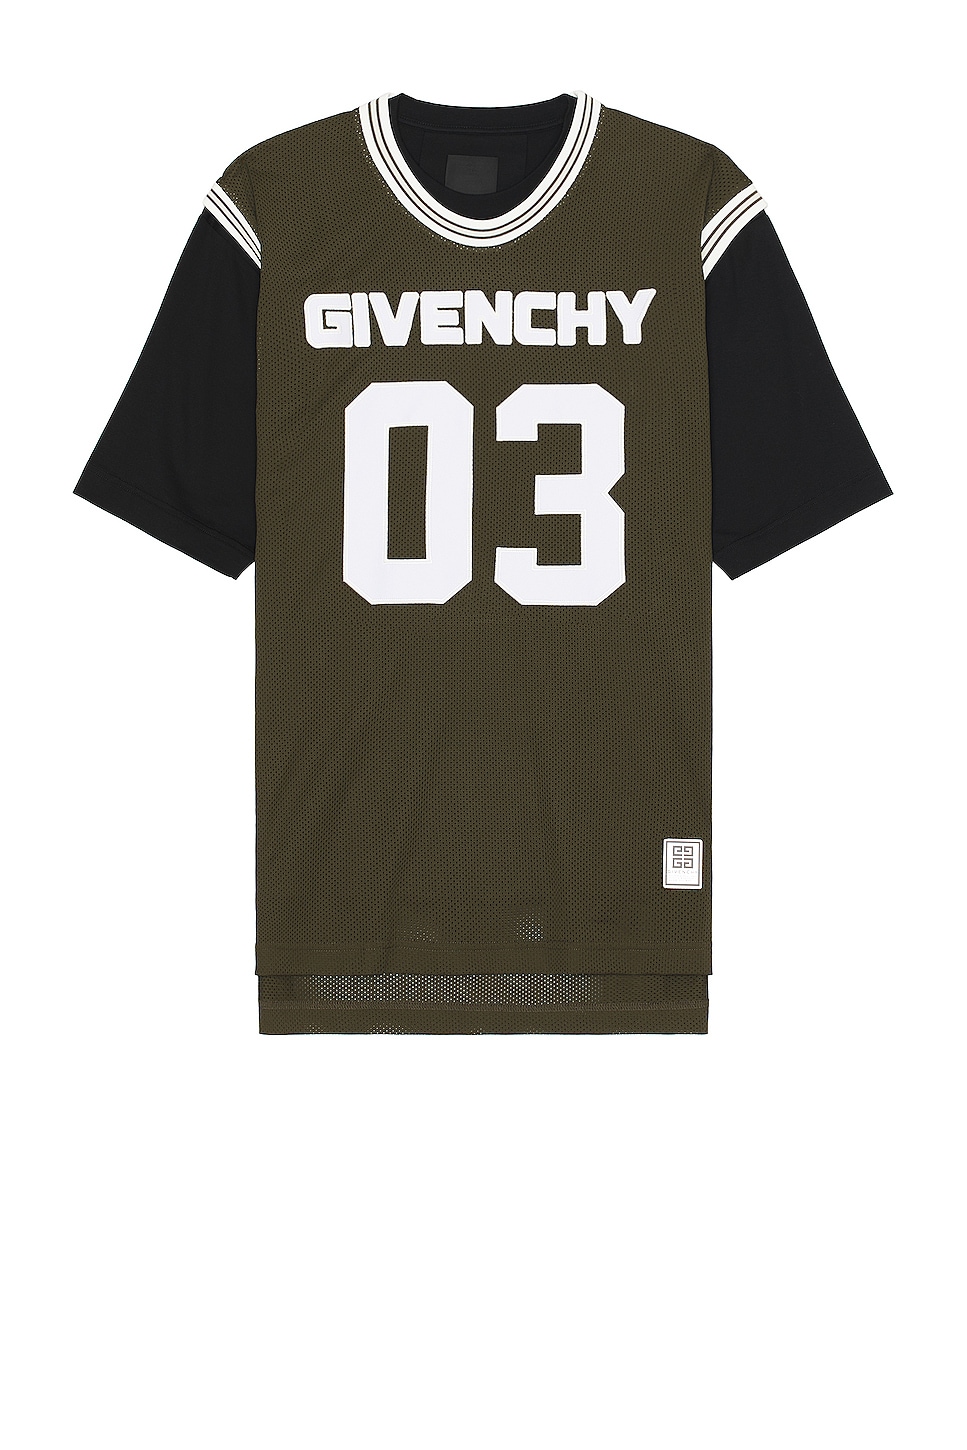 Image 1 of Givenchy Double Layer Tee in Black & Khaki